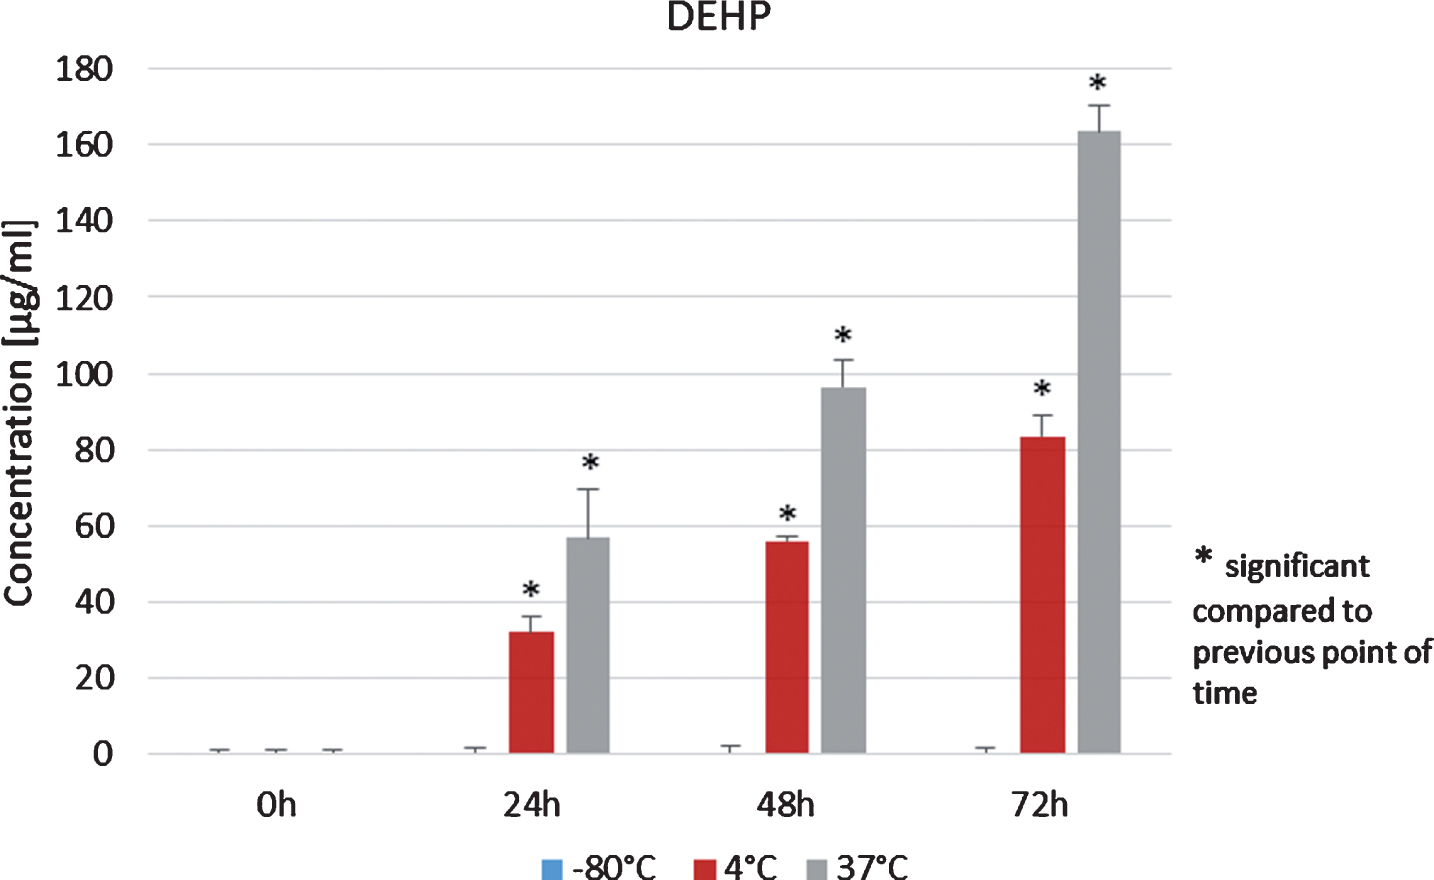 DEHP concentrations in the plasma of peripheral stem cell donors during storage at –80°C, 4°C and 37°C.